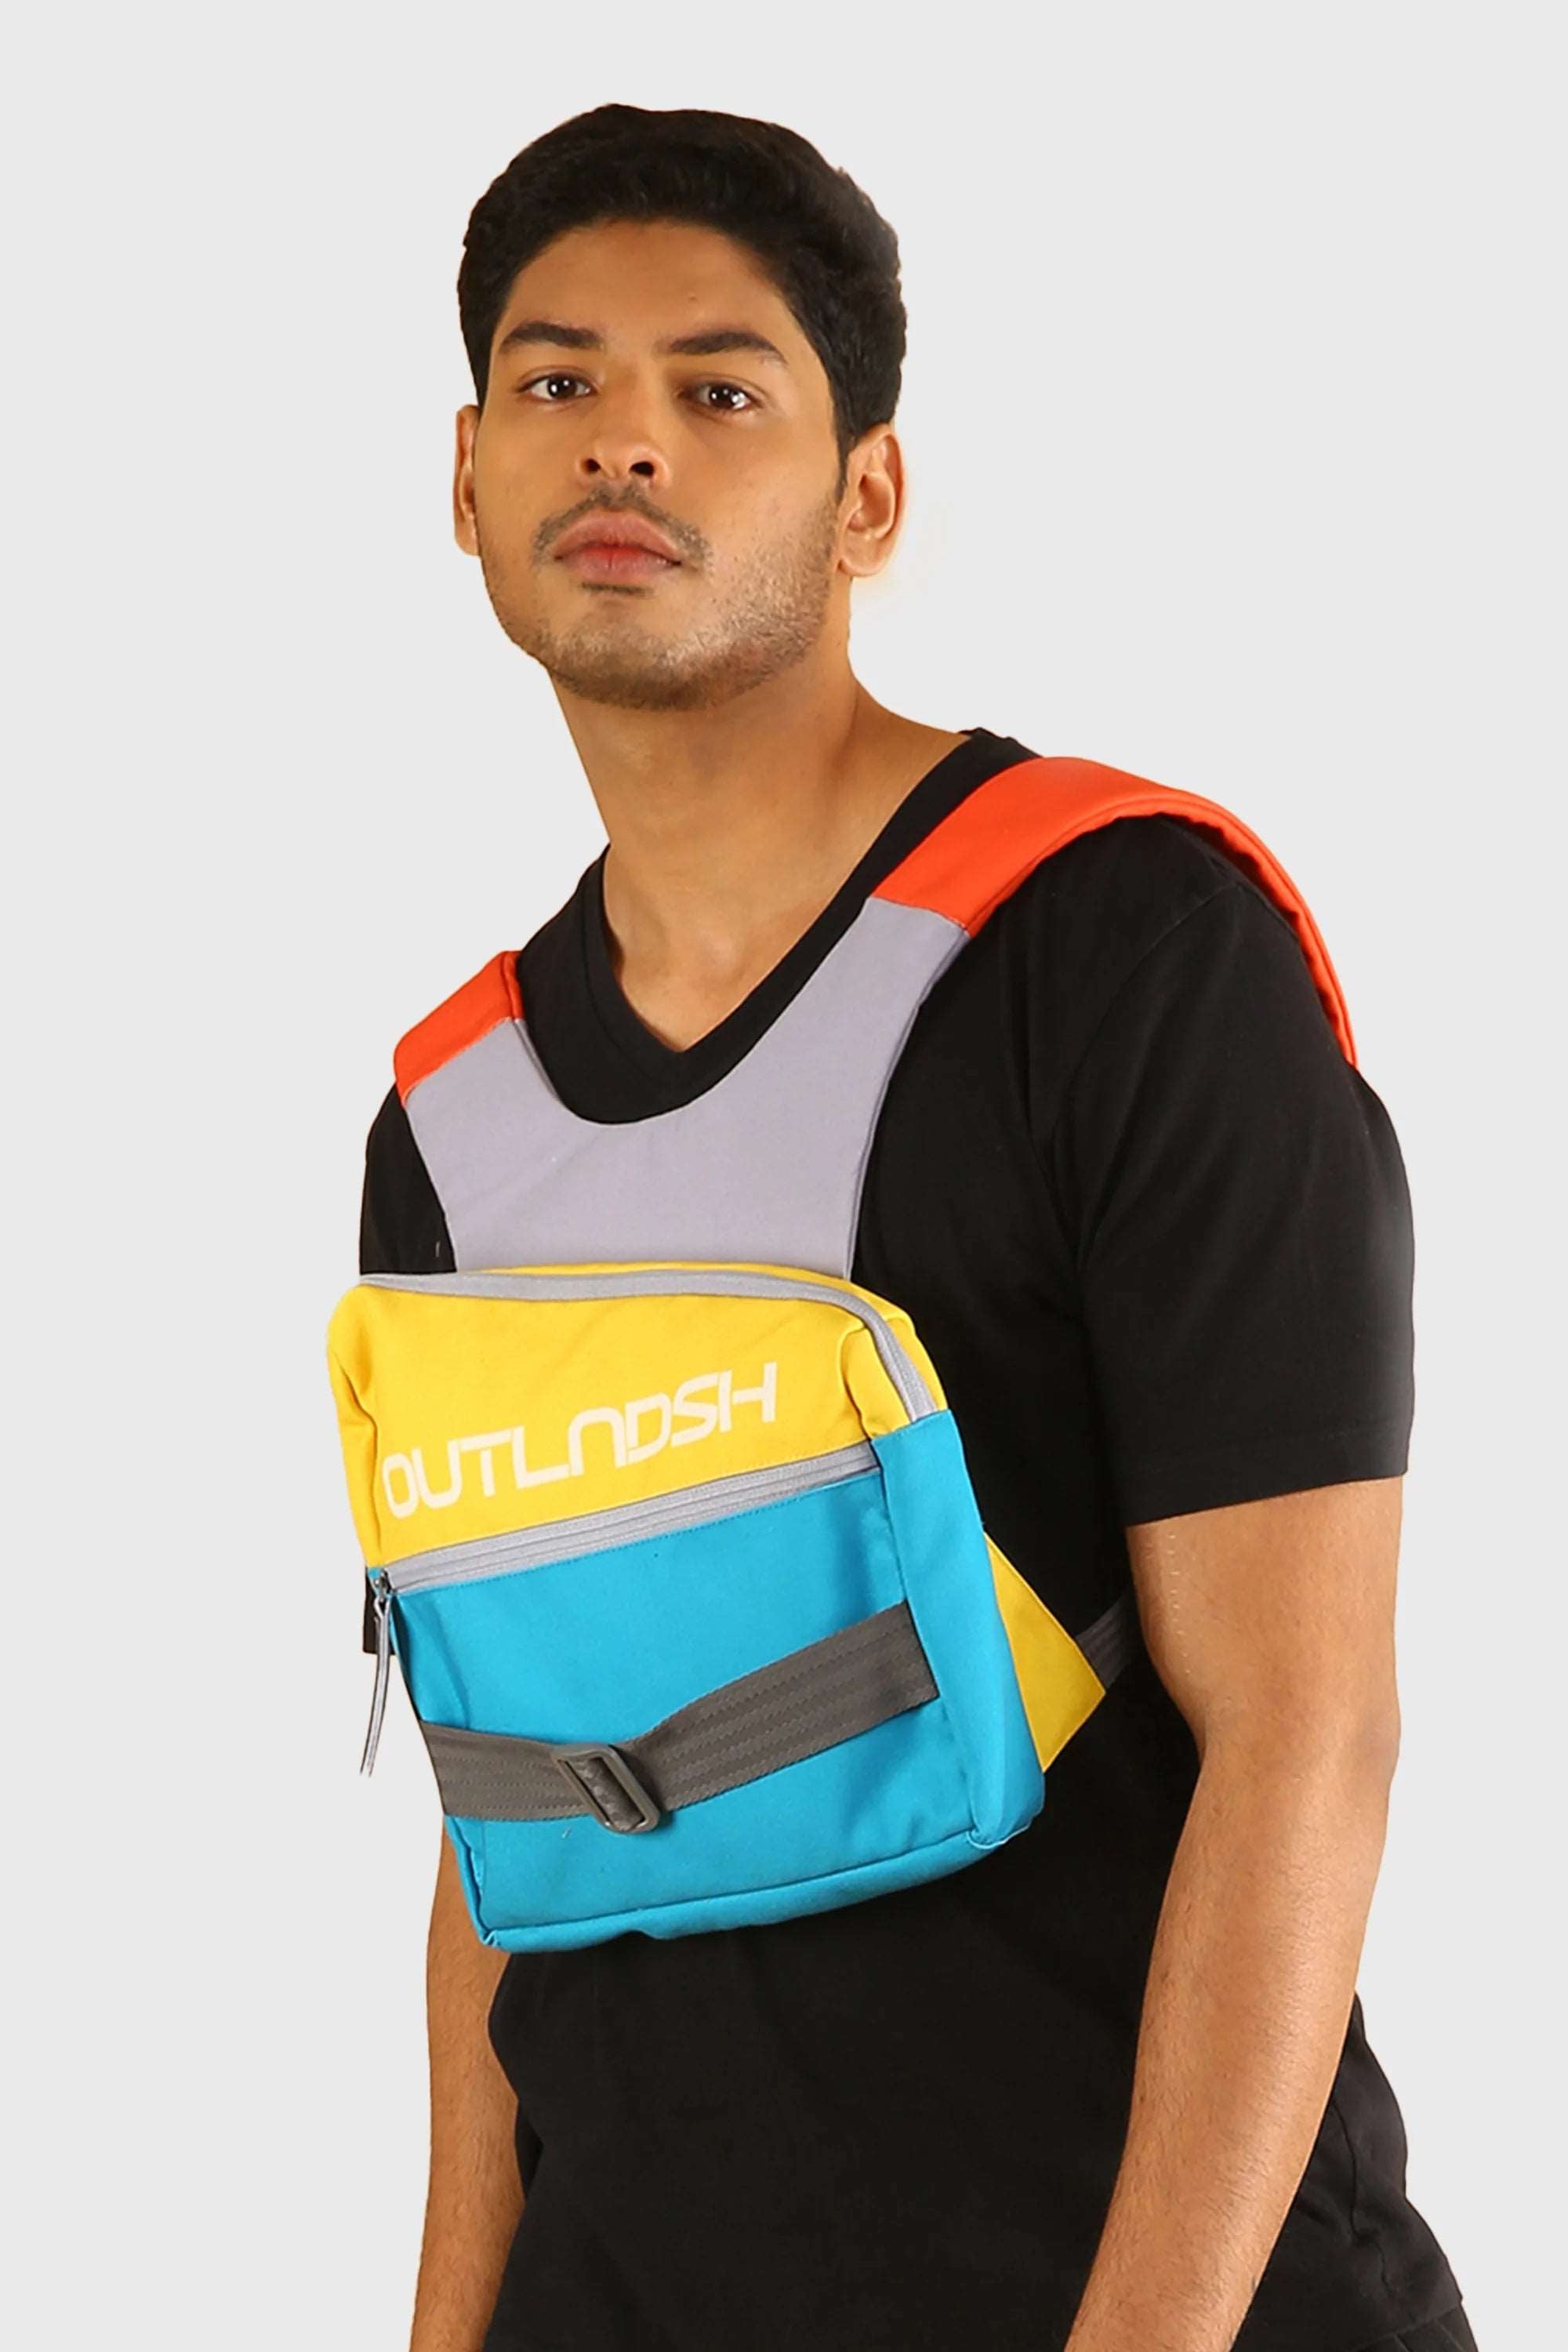 OUTLNDSH Mini Backpack bag plus chest bag yellow color 